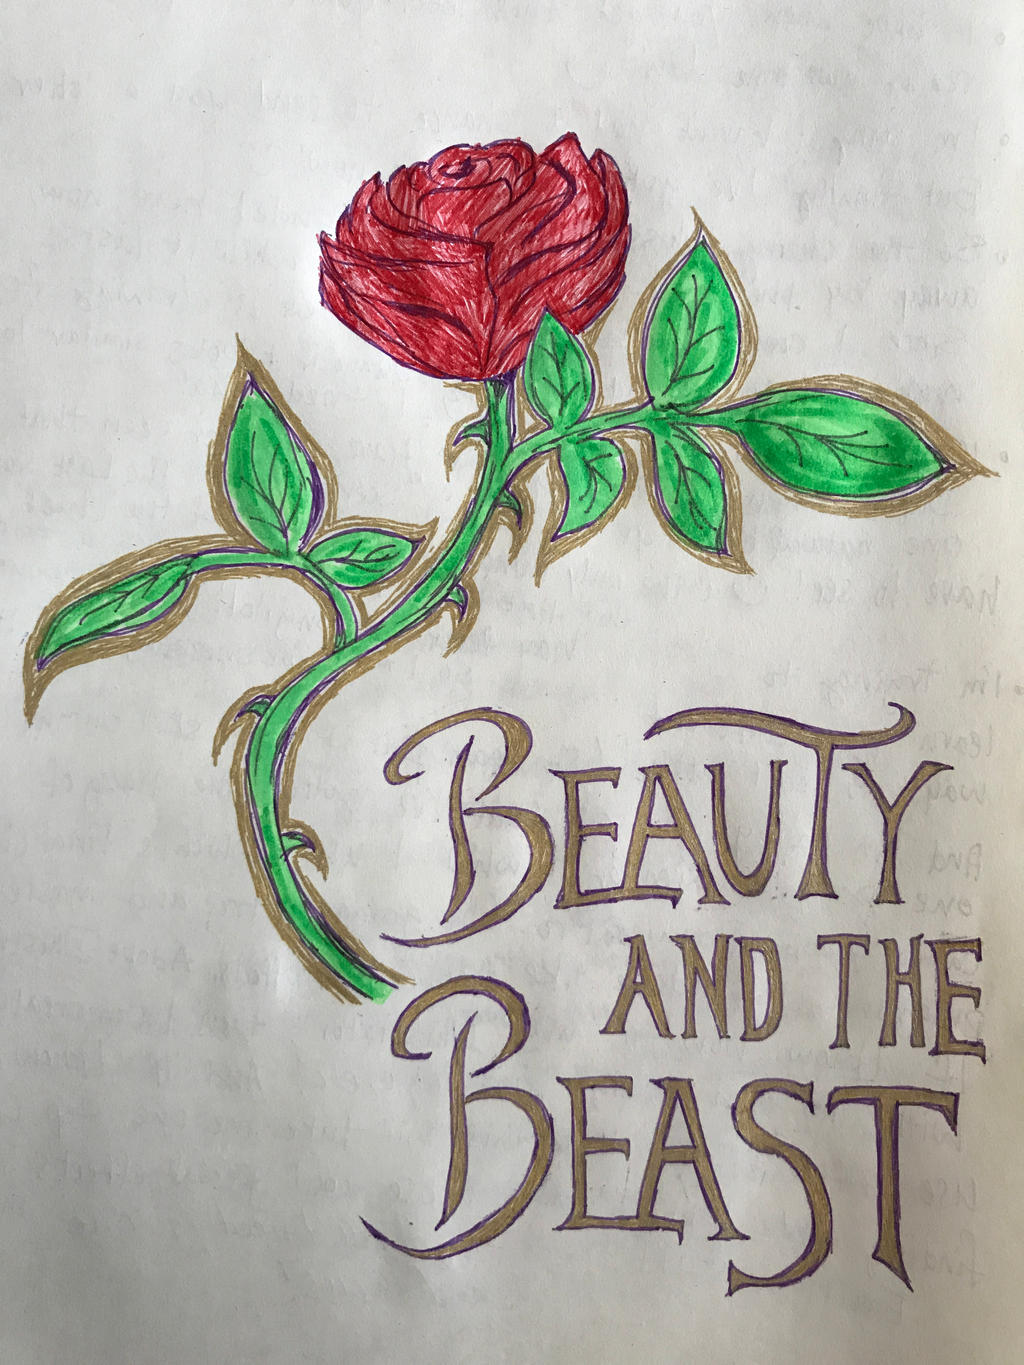 Beauty and the Beast - Rose by closeyoureyes0329 on DeviantArt